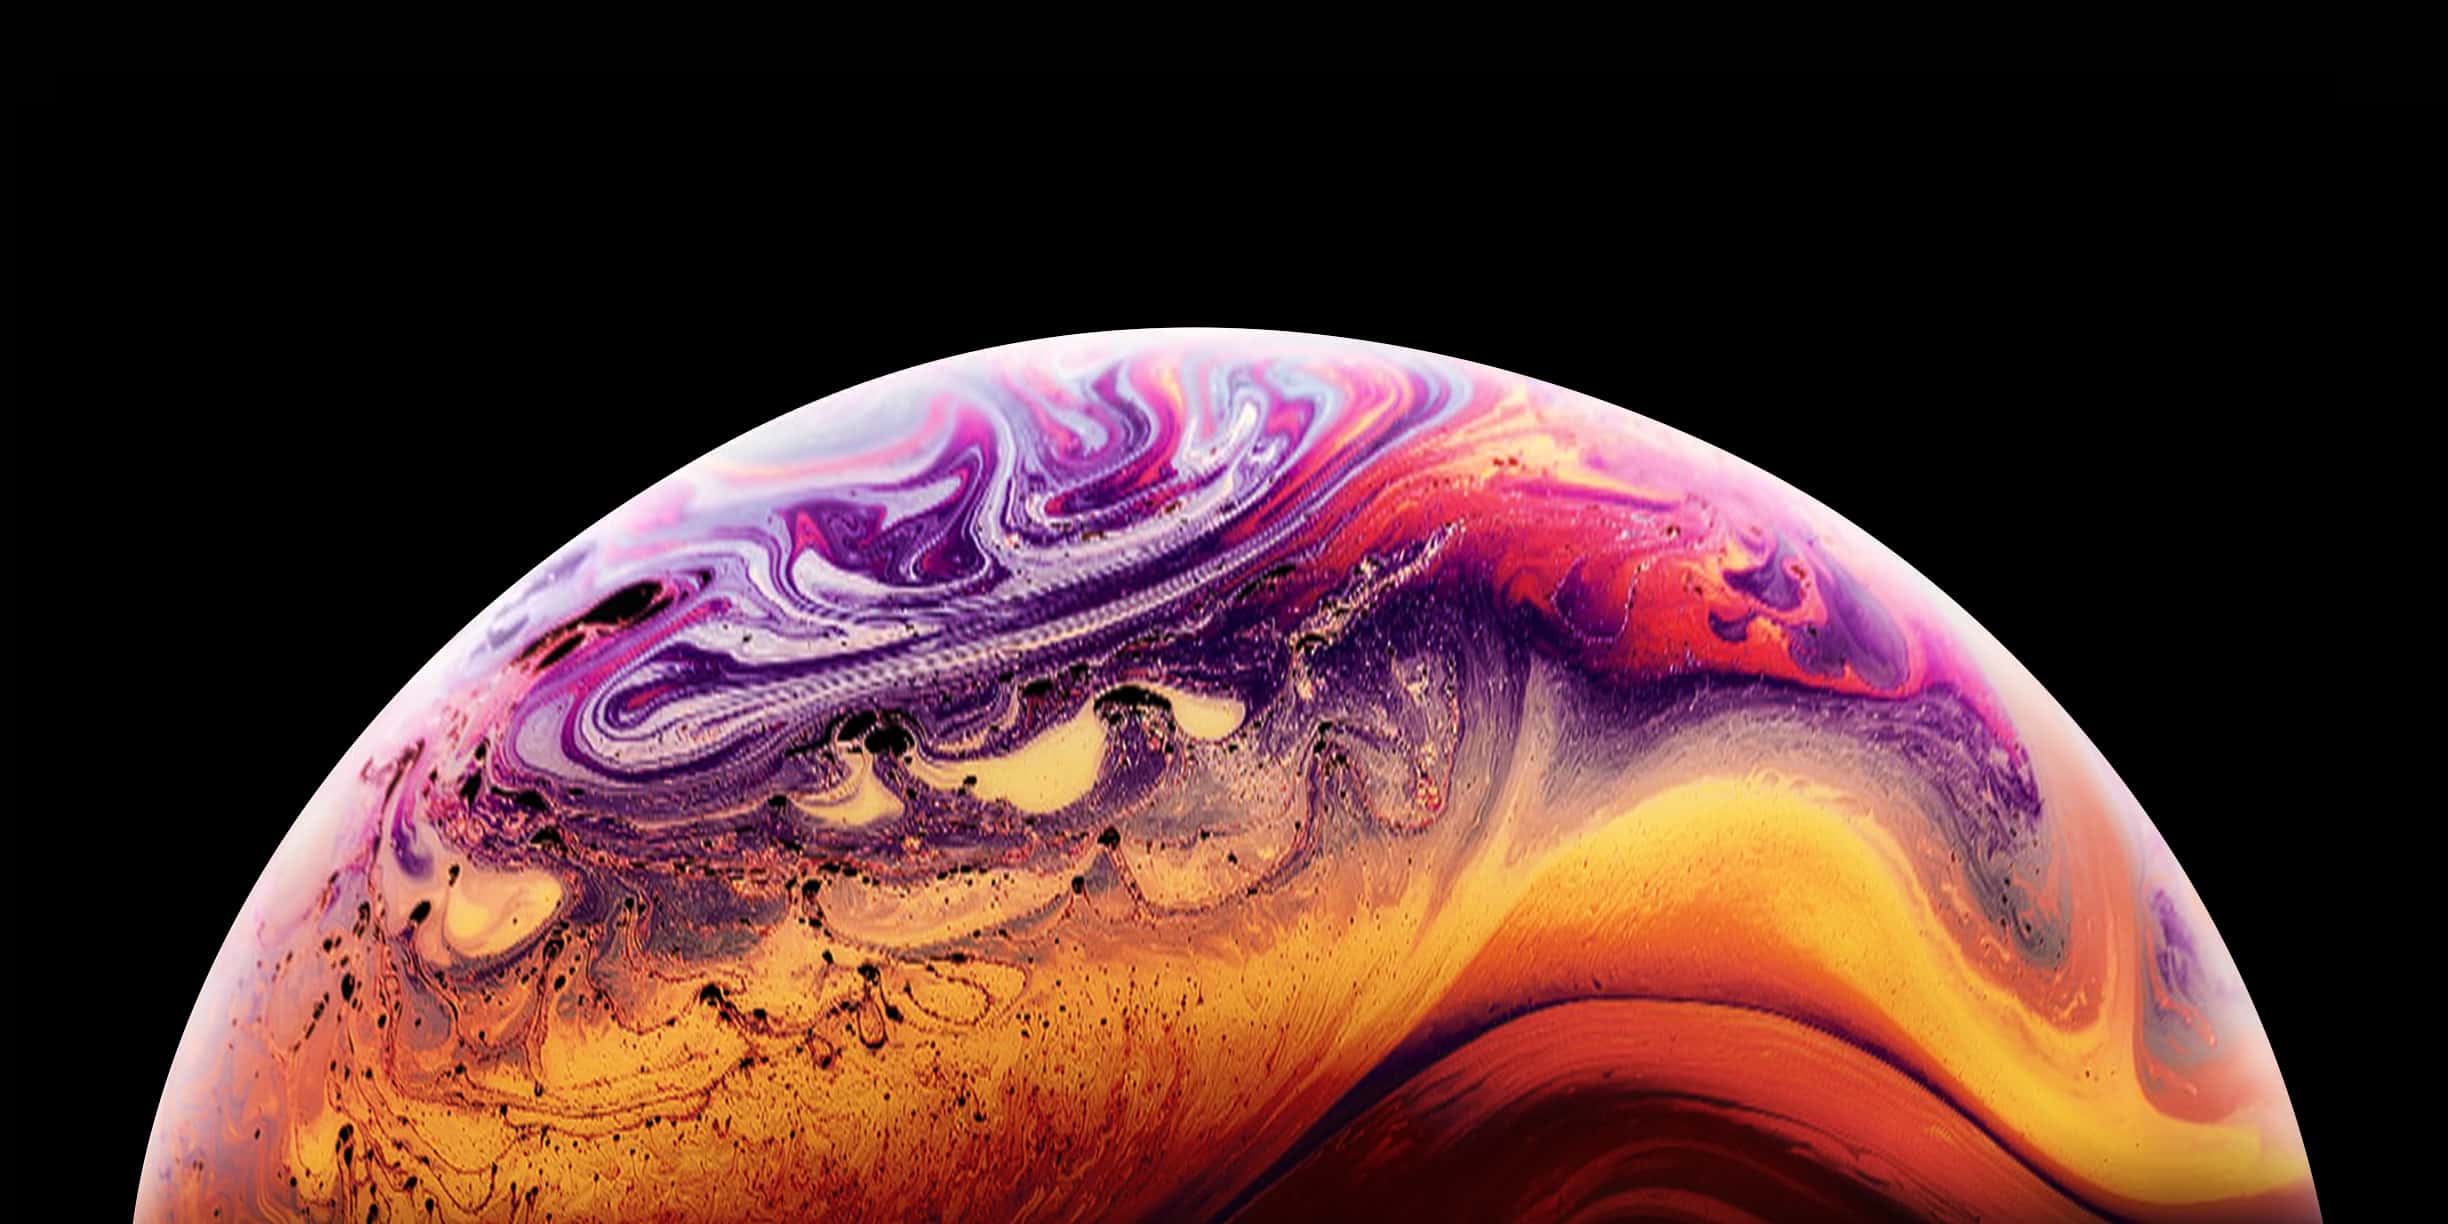 Grab the new iPhone XS wallpaper right here | Cult of Mac